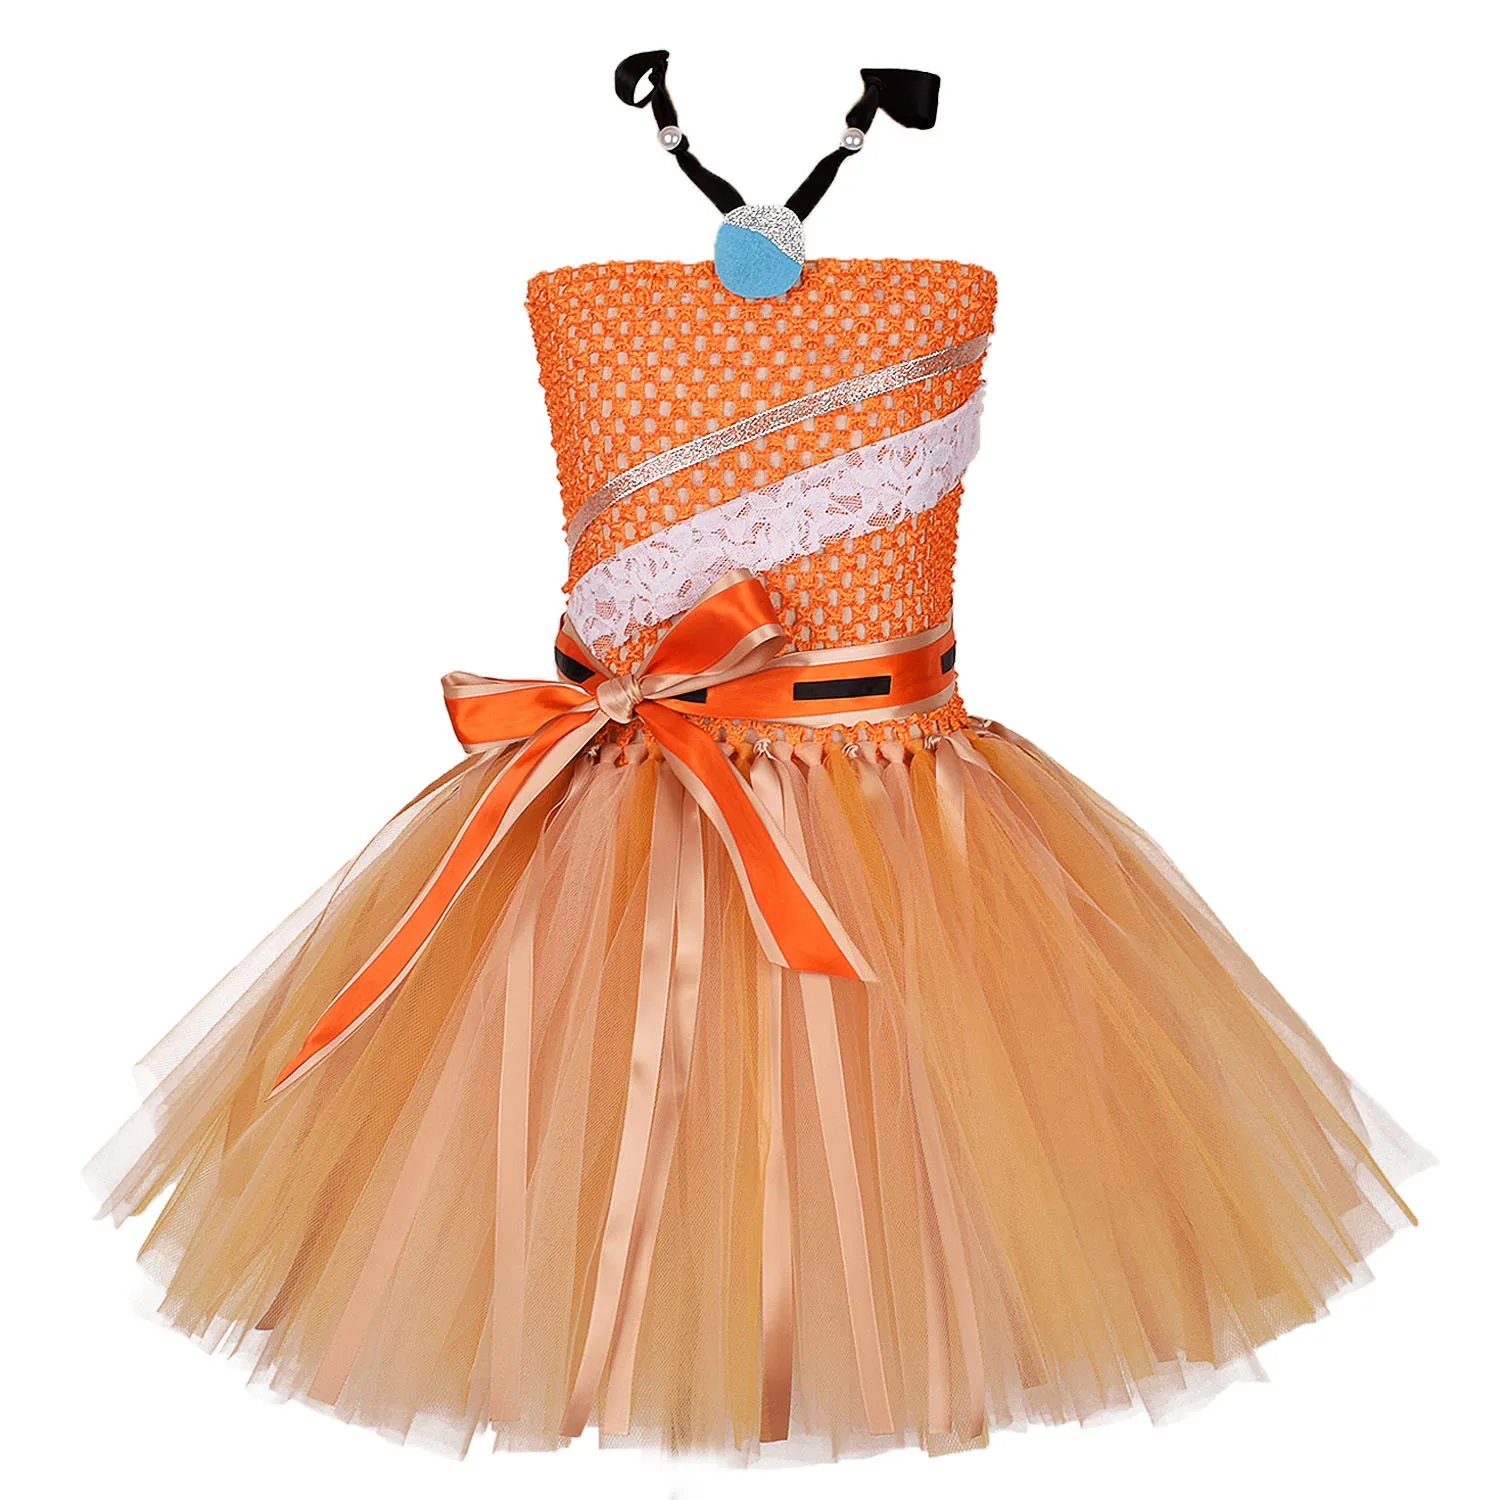 Princess Moana Tutu Dress For Girls Birthday Party Dresses Kids Cosplay Oufit Halloween Costume Toddler Photo Props 1-14Y